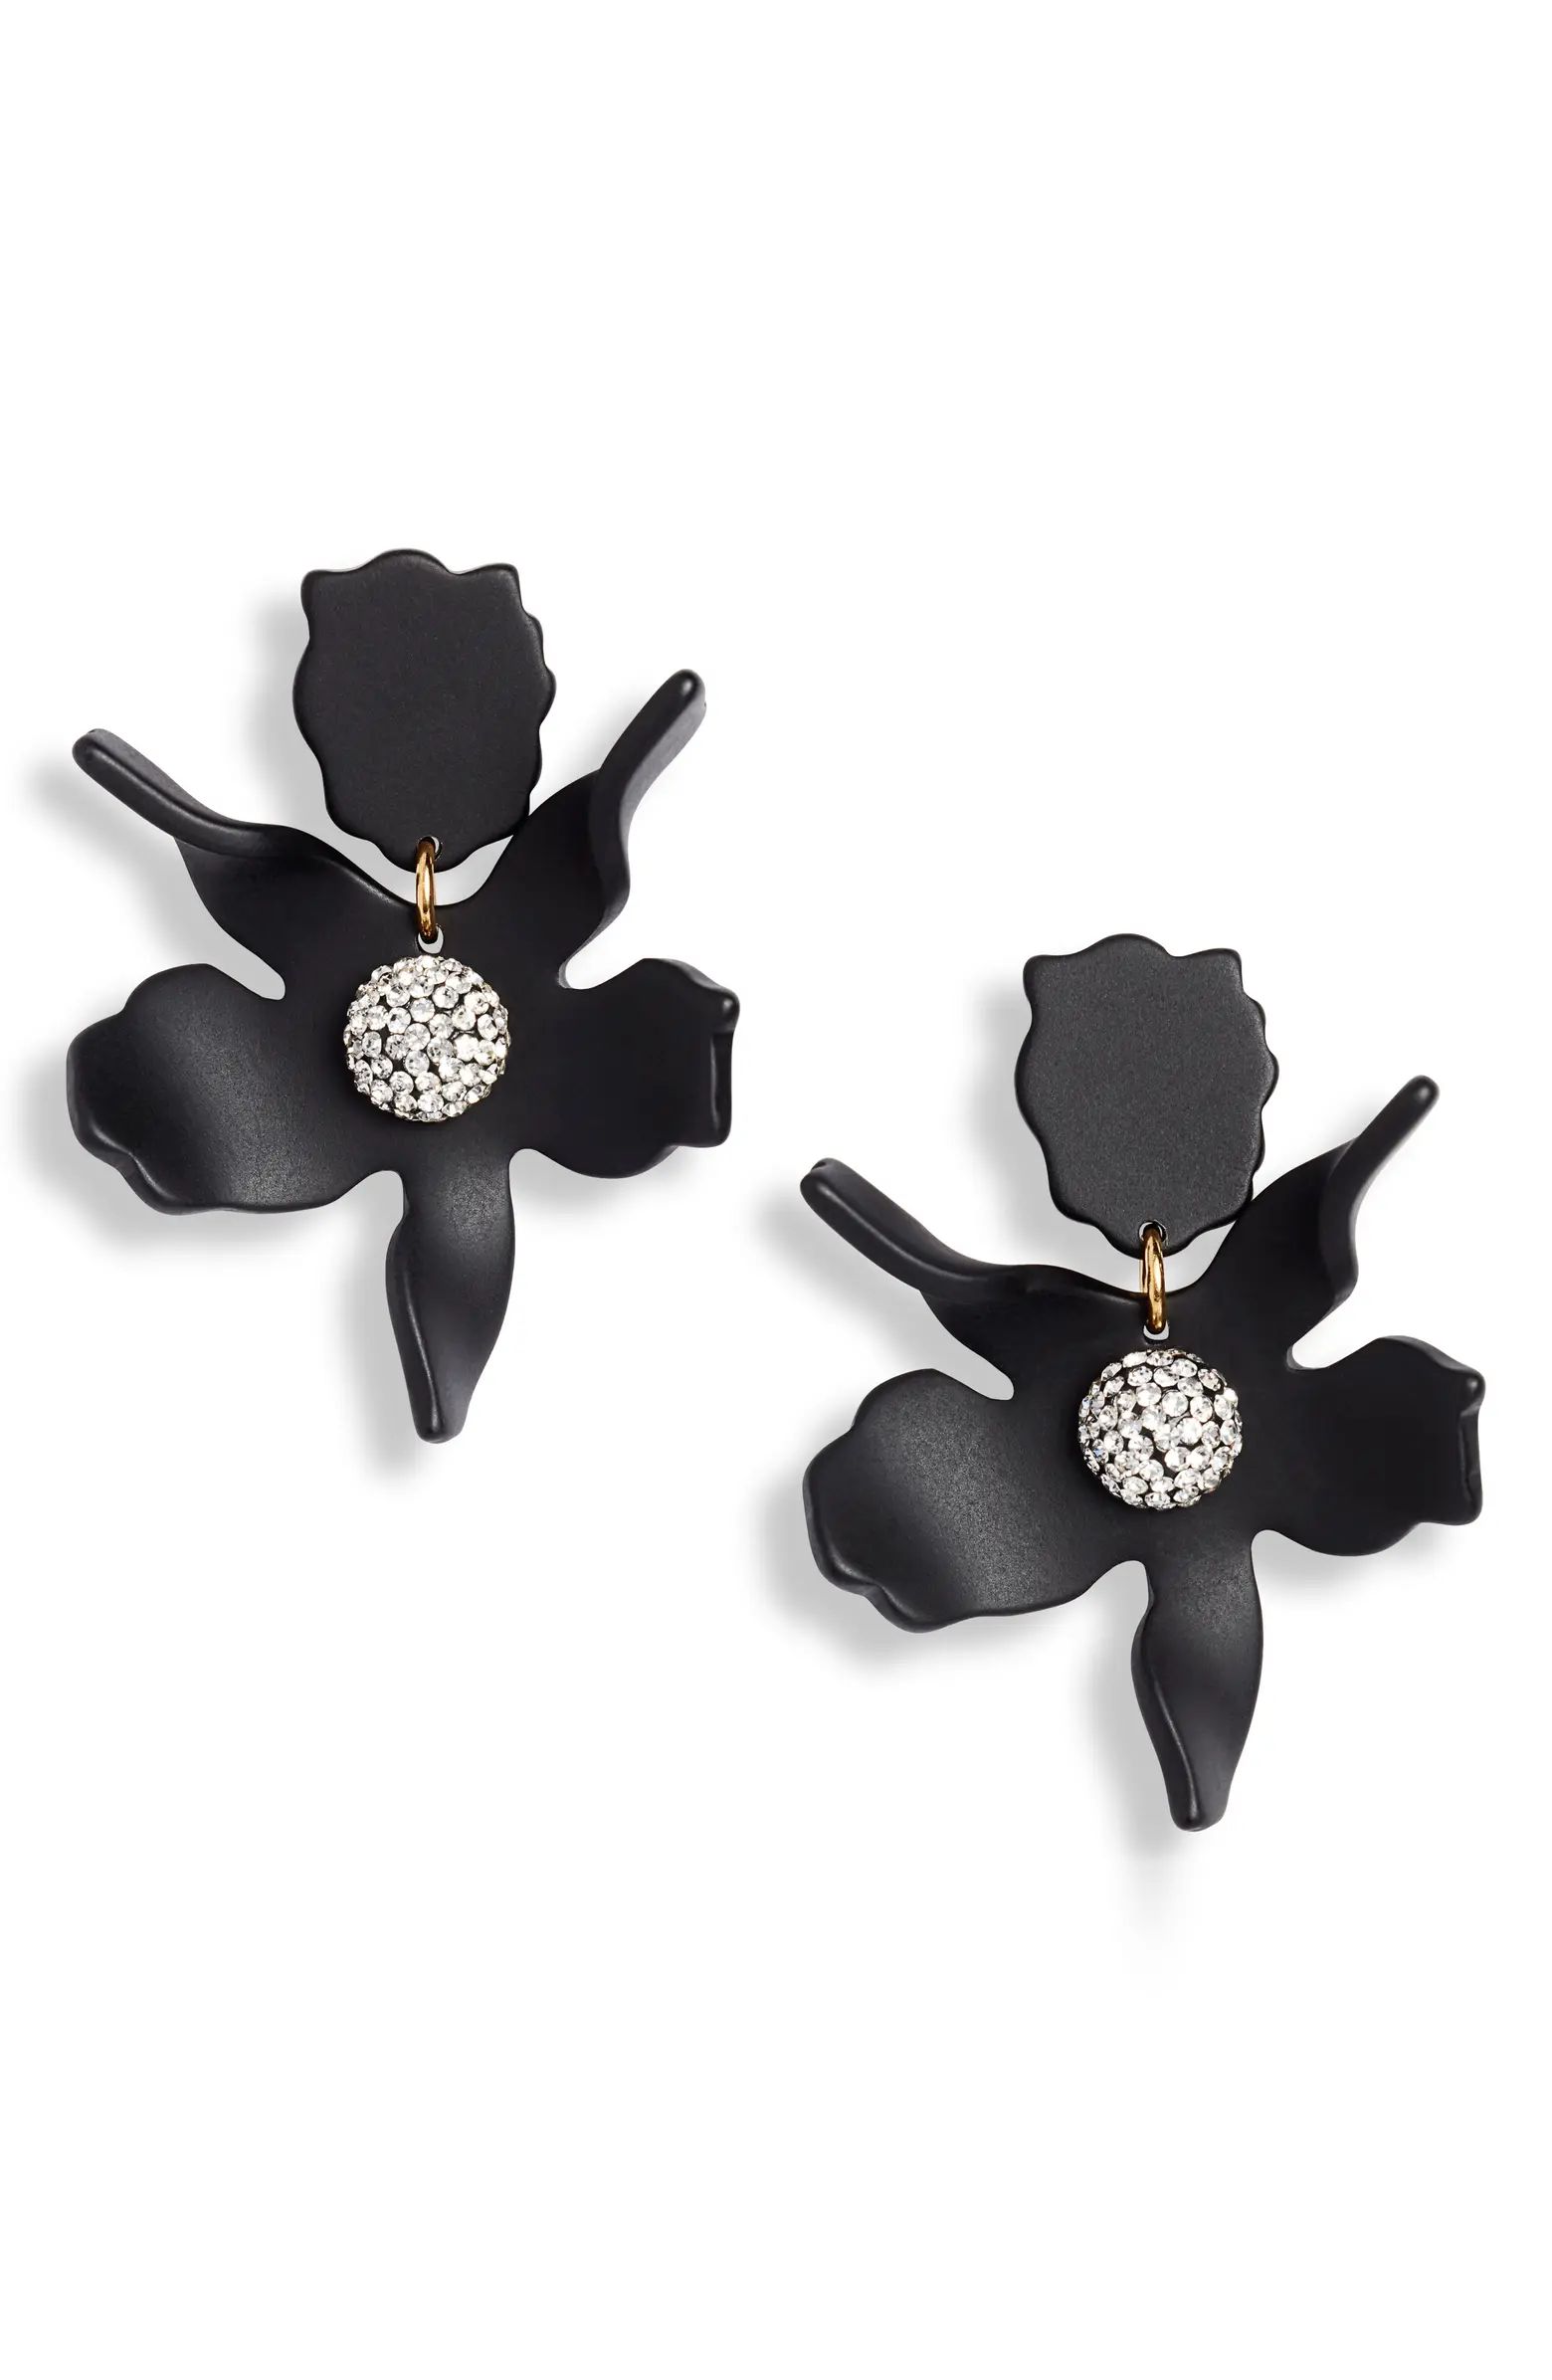 Lele Sadoughi Small Crystal Lily Earrings | Nordstrom | Nordstrom